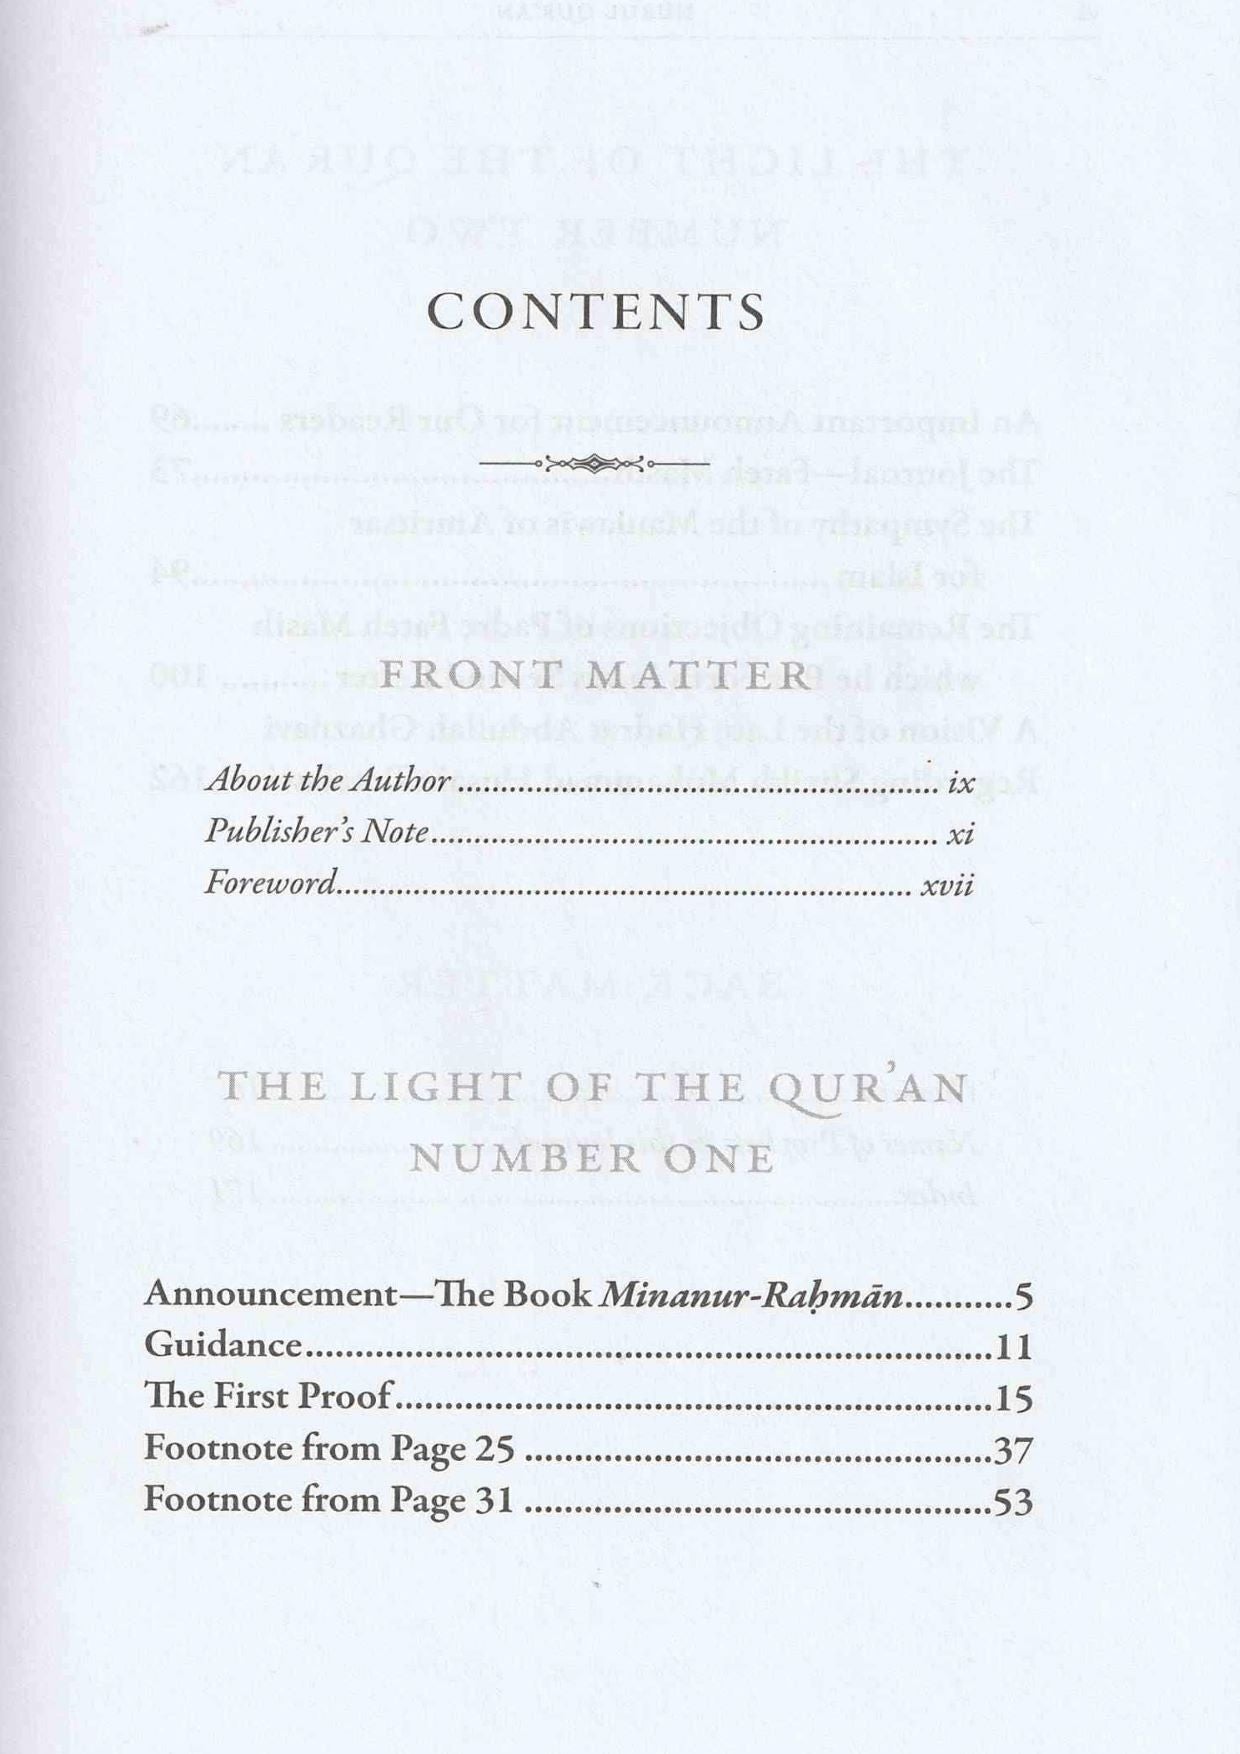 The Light of the Holy Quran